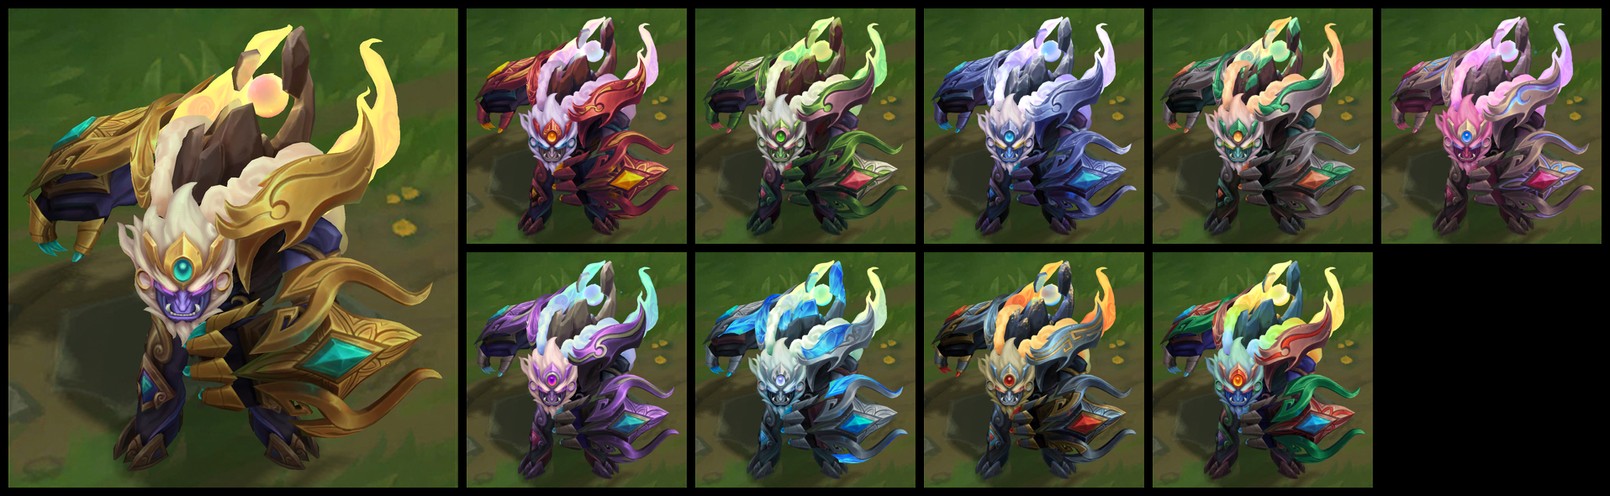 LoL Account With Coral Reef Malphite Skin